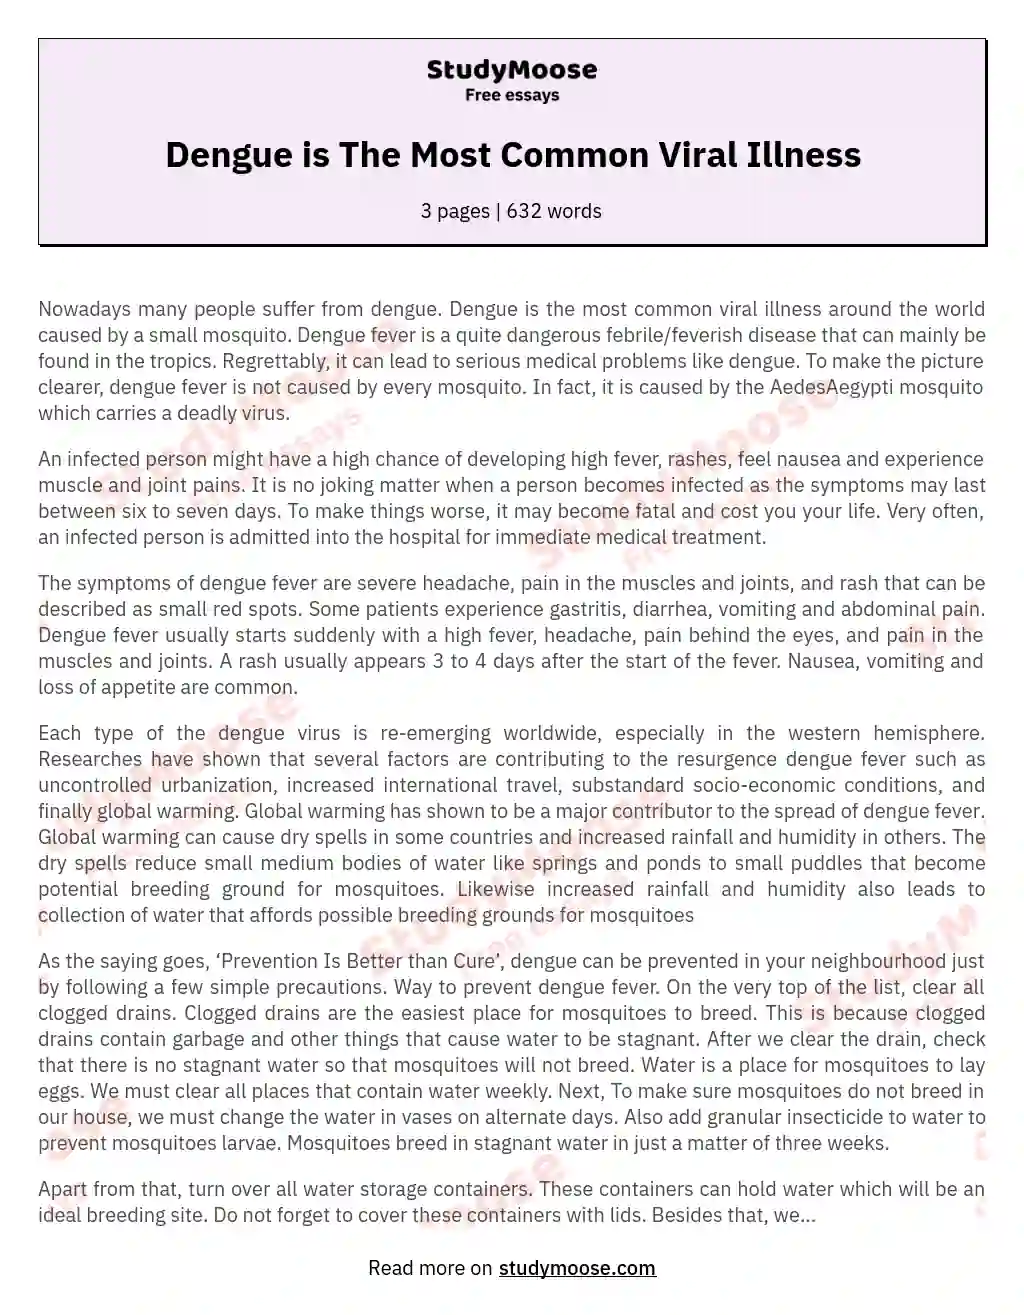 Dengue is The Most Common Viral Illness essay